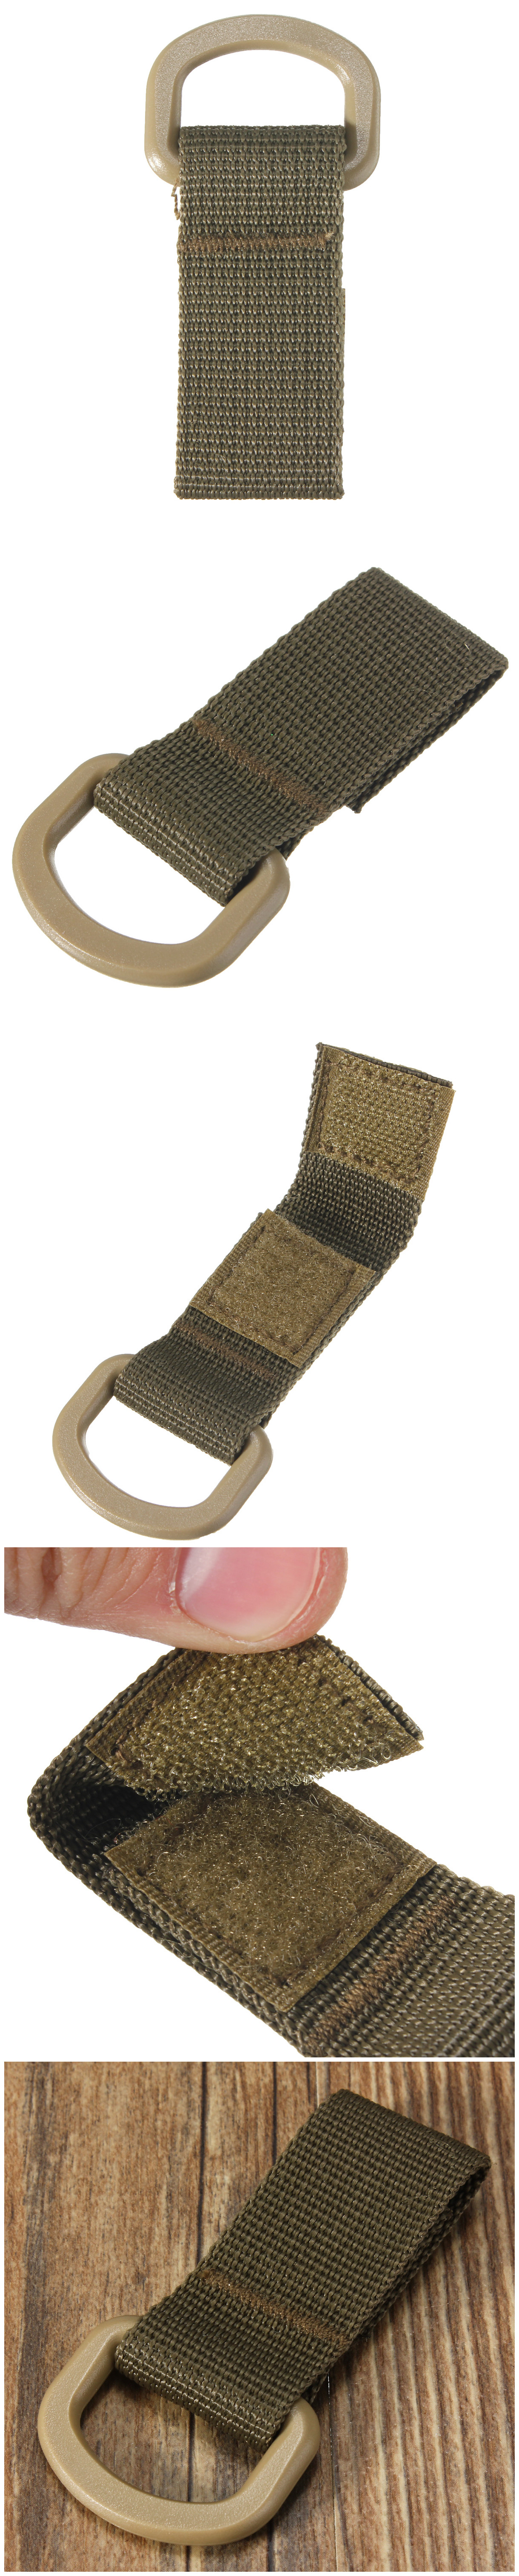 Military-Tactical-Carabiner-Nylon-Strap-Buckle-Hook-Belt-Hanging-Keychain-D-shaped-Ring-Molle-System-1028668-7